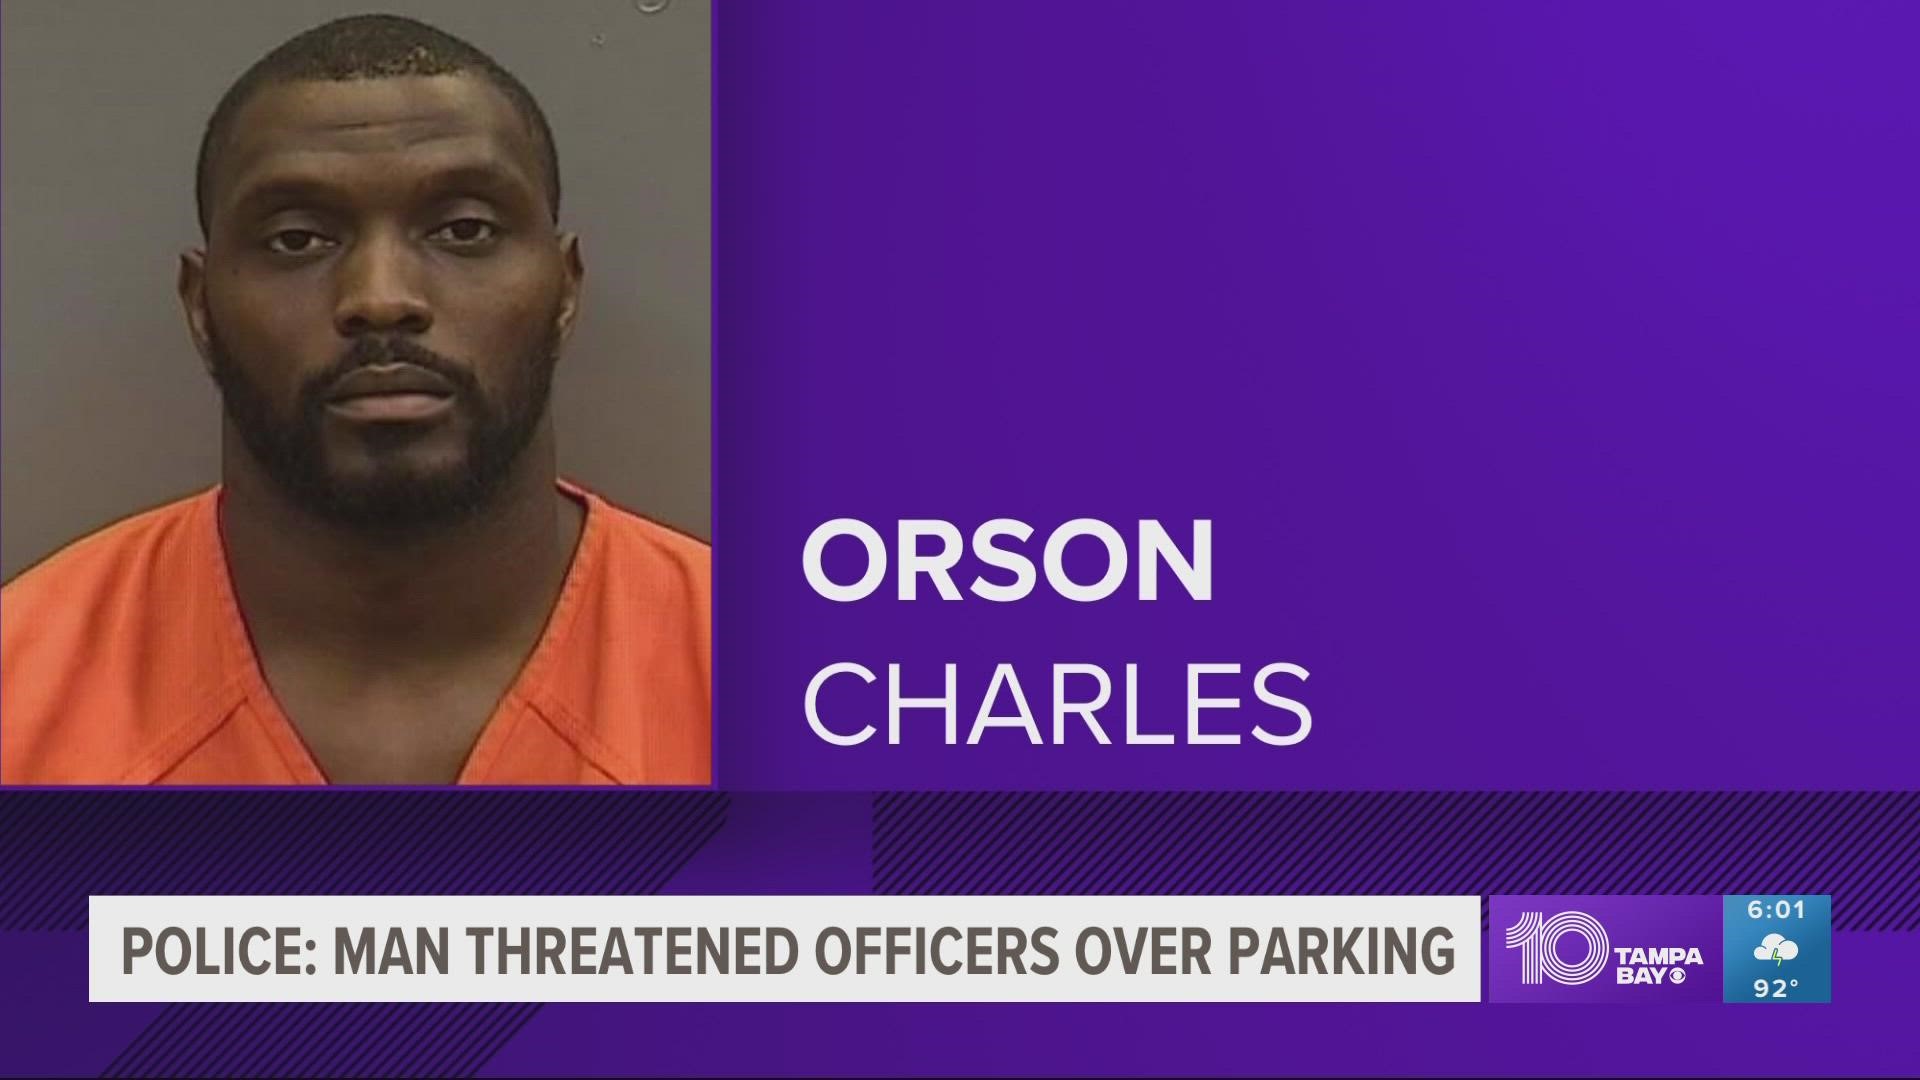 Orson Charles reportedly threatened to shoot two off-duty law enforcement officers over a parking spot dispute.